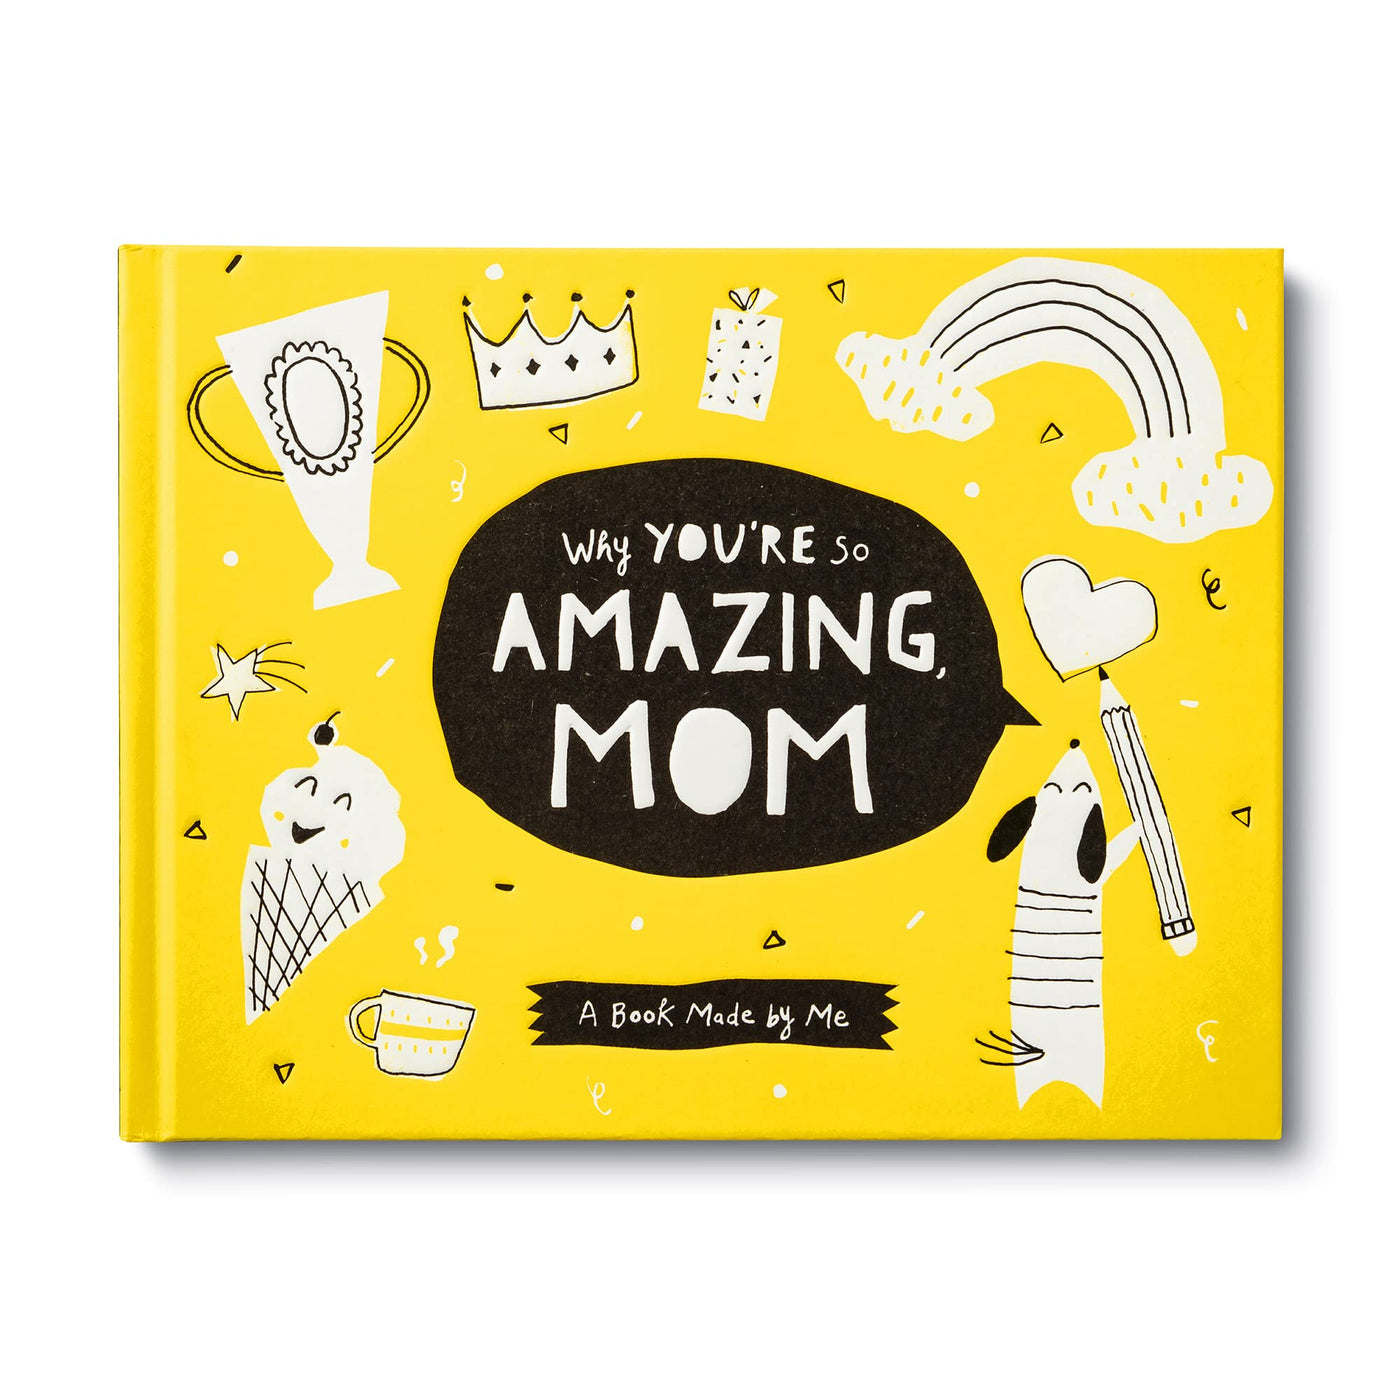 Why You're So Amazing Mom Fill-In the Blank Book